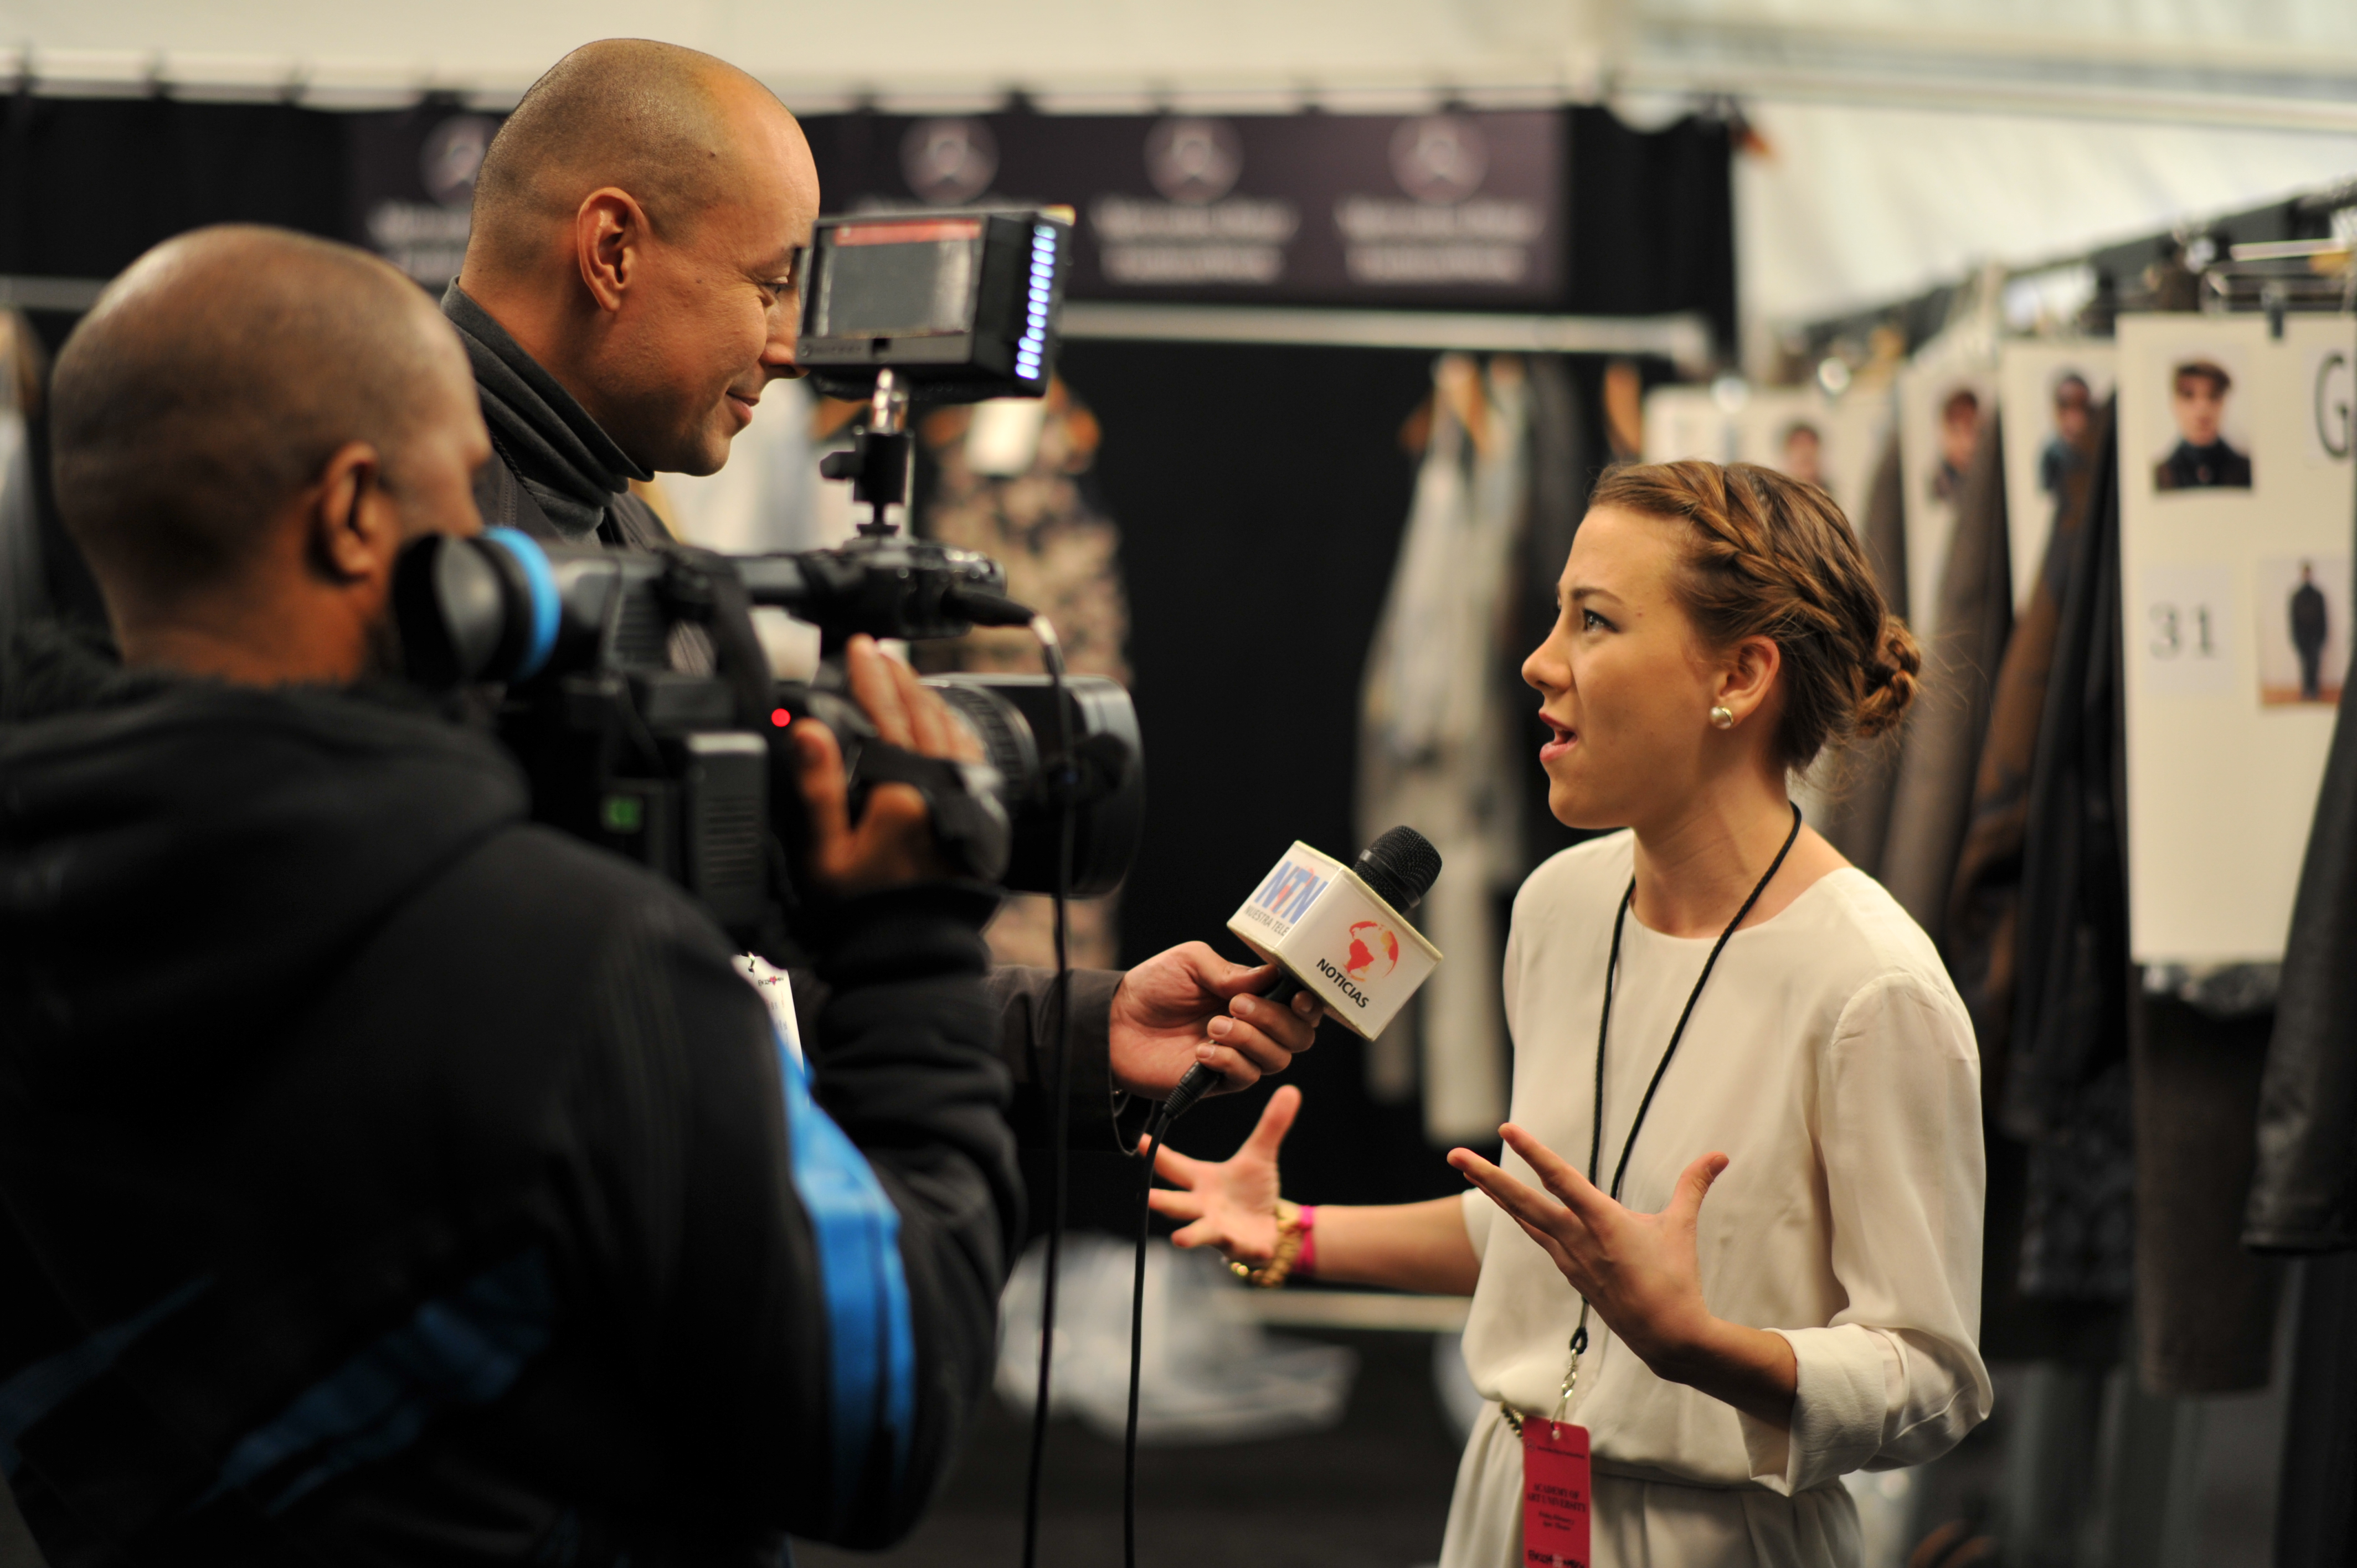 Andrea Nieto during an interview with press at New York Fashion Week in February 2014.